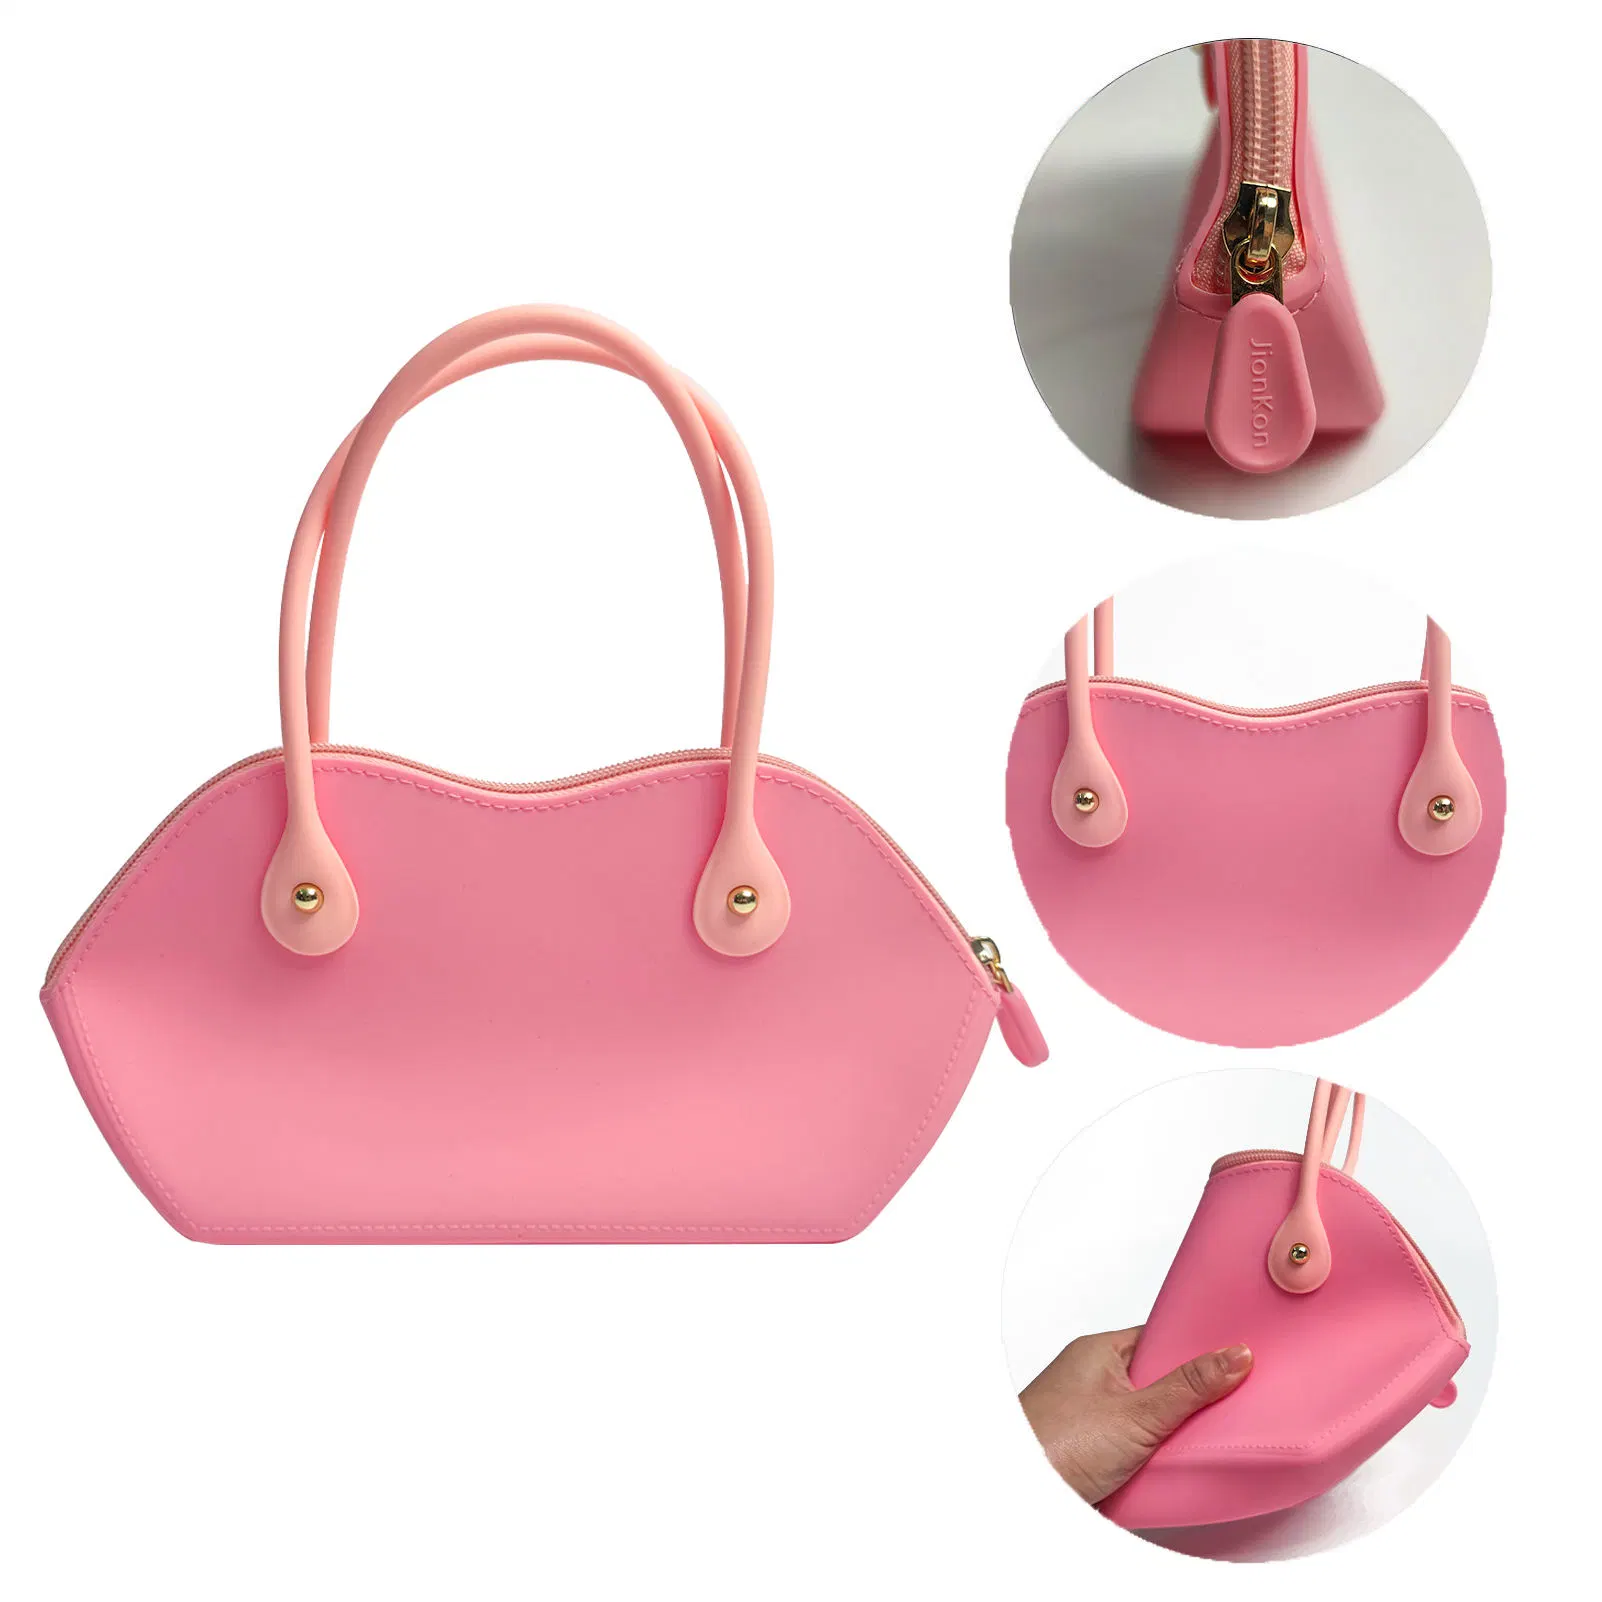 Women's Silicone Handbag Waterproof Travel Bags Silicone Tote Bag for Girls